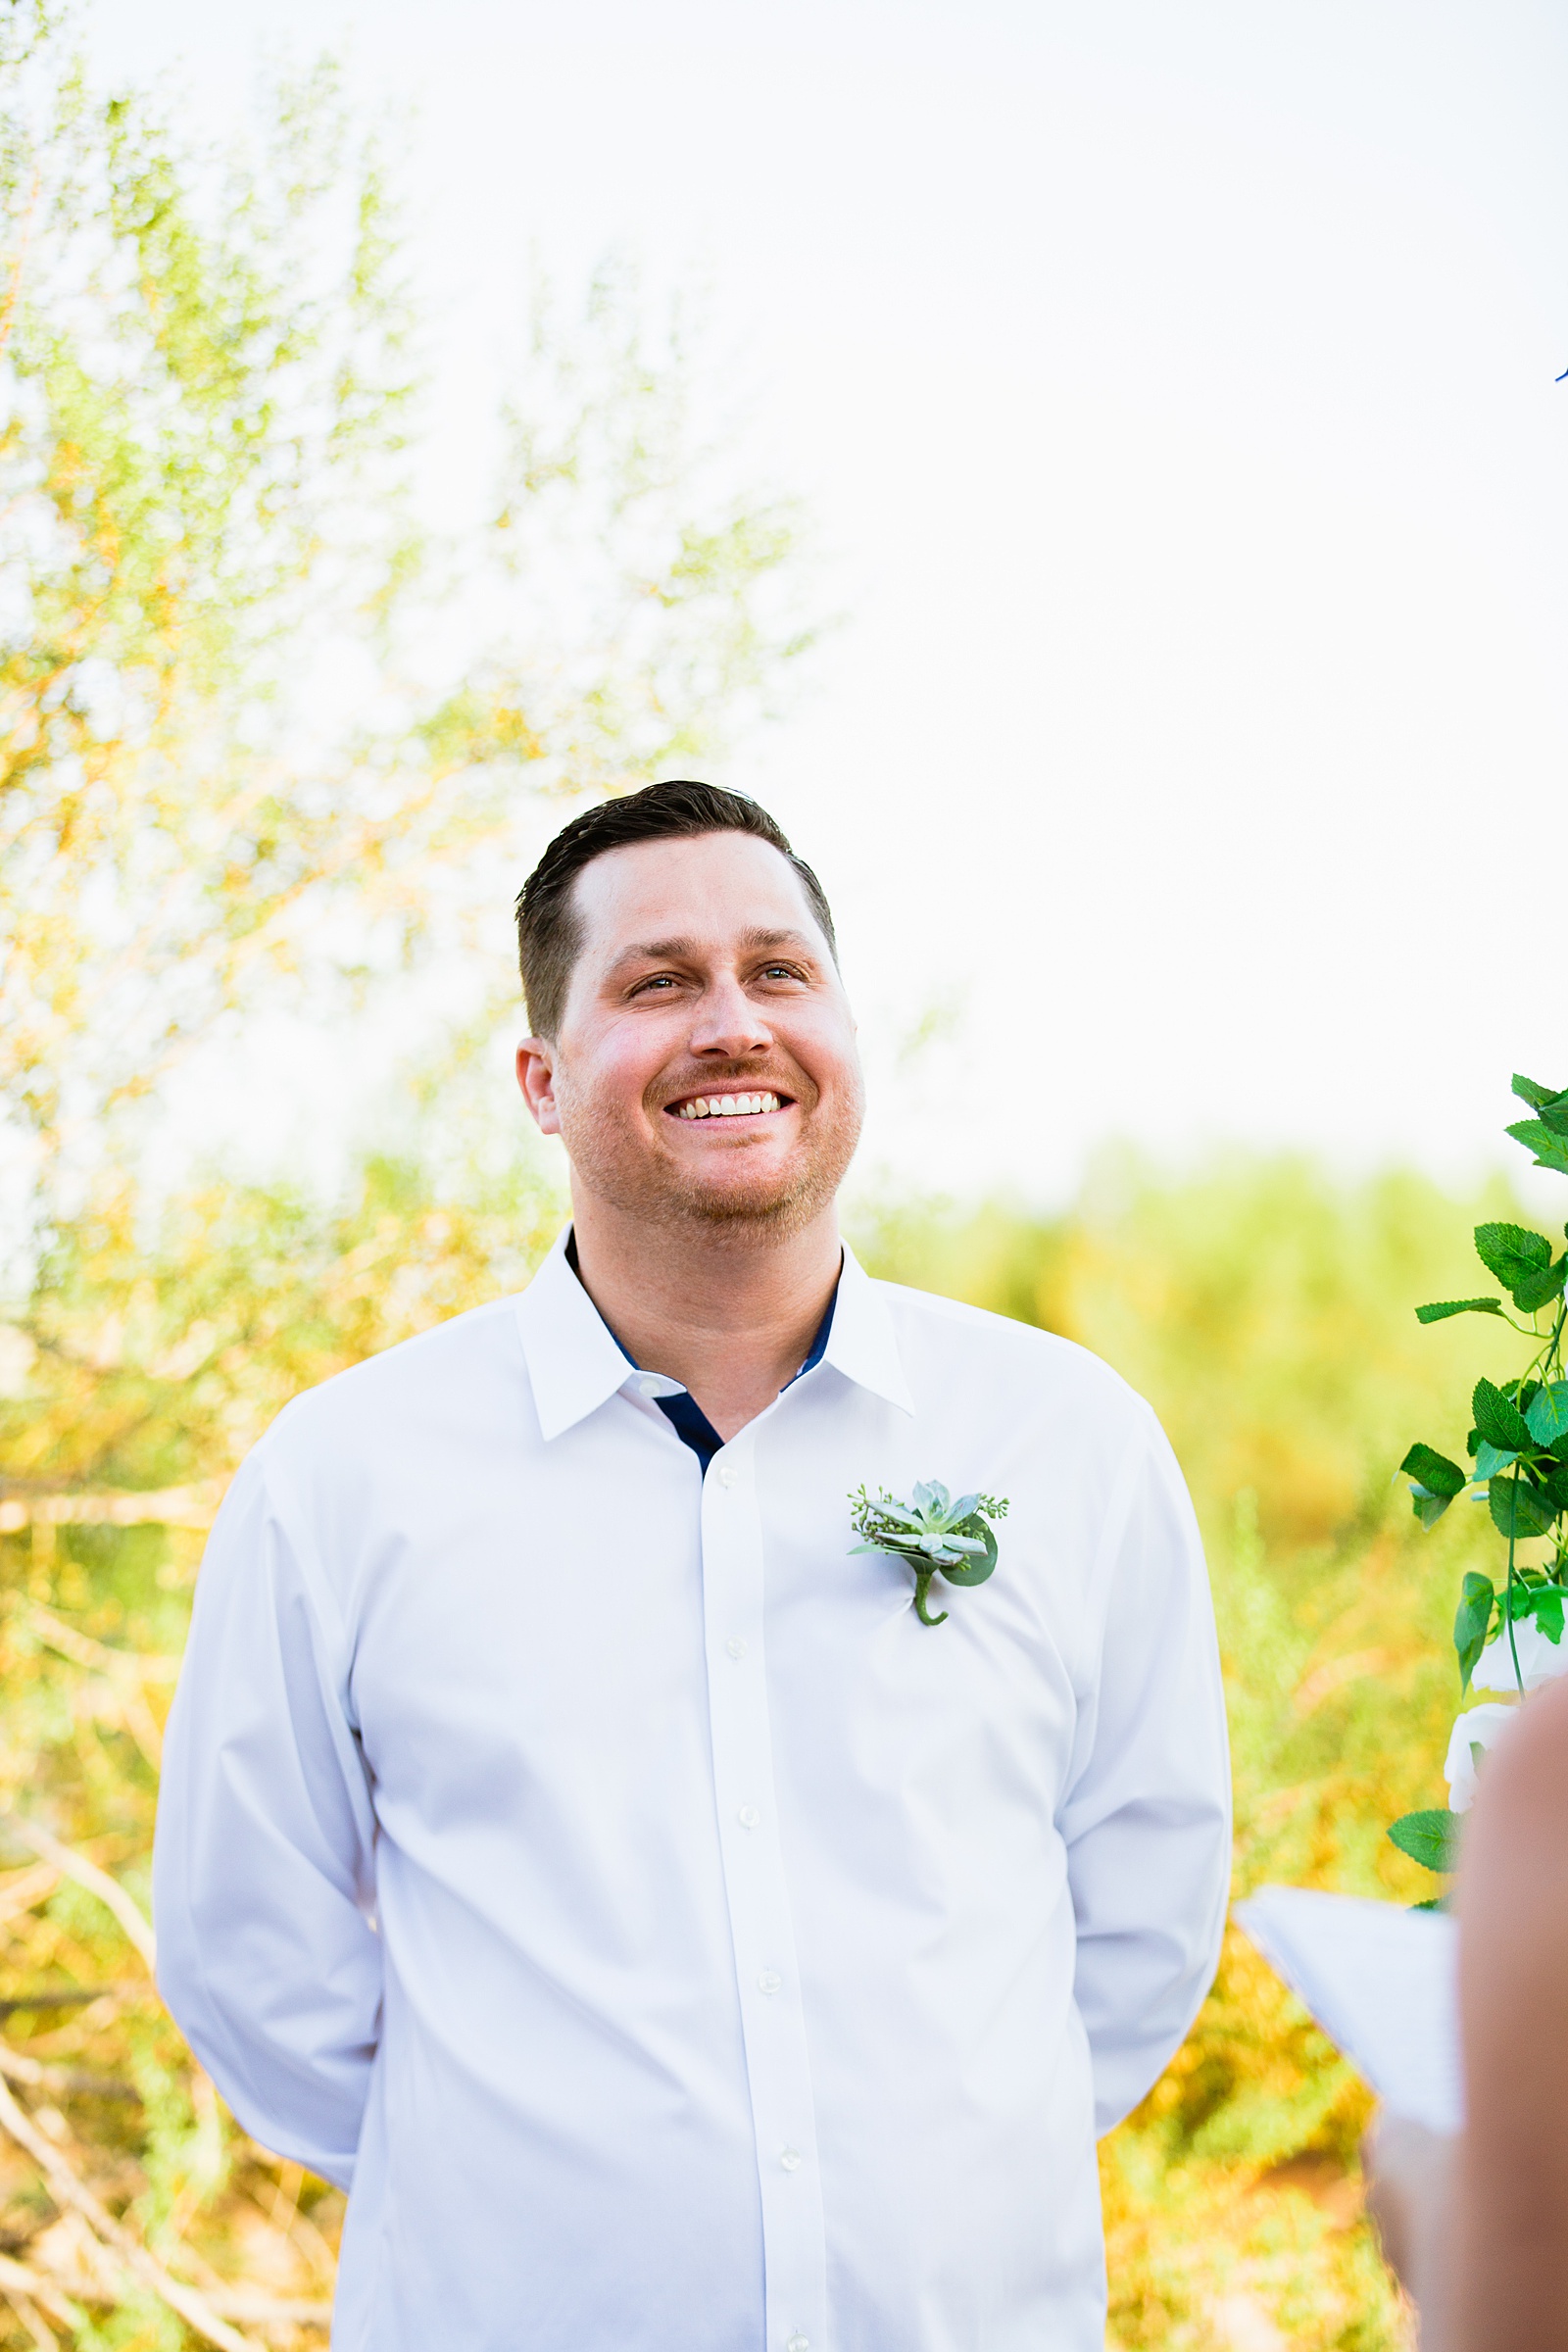 Groom looking at his bride during their wedding ceremony at a backyard by Scottsdale wedding photographer PMA Photography.